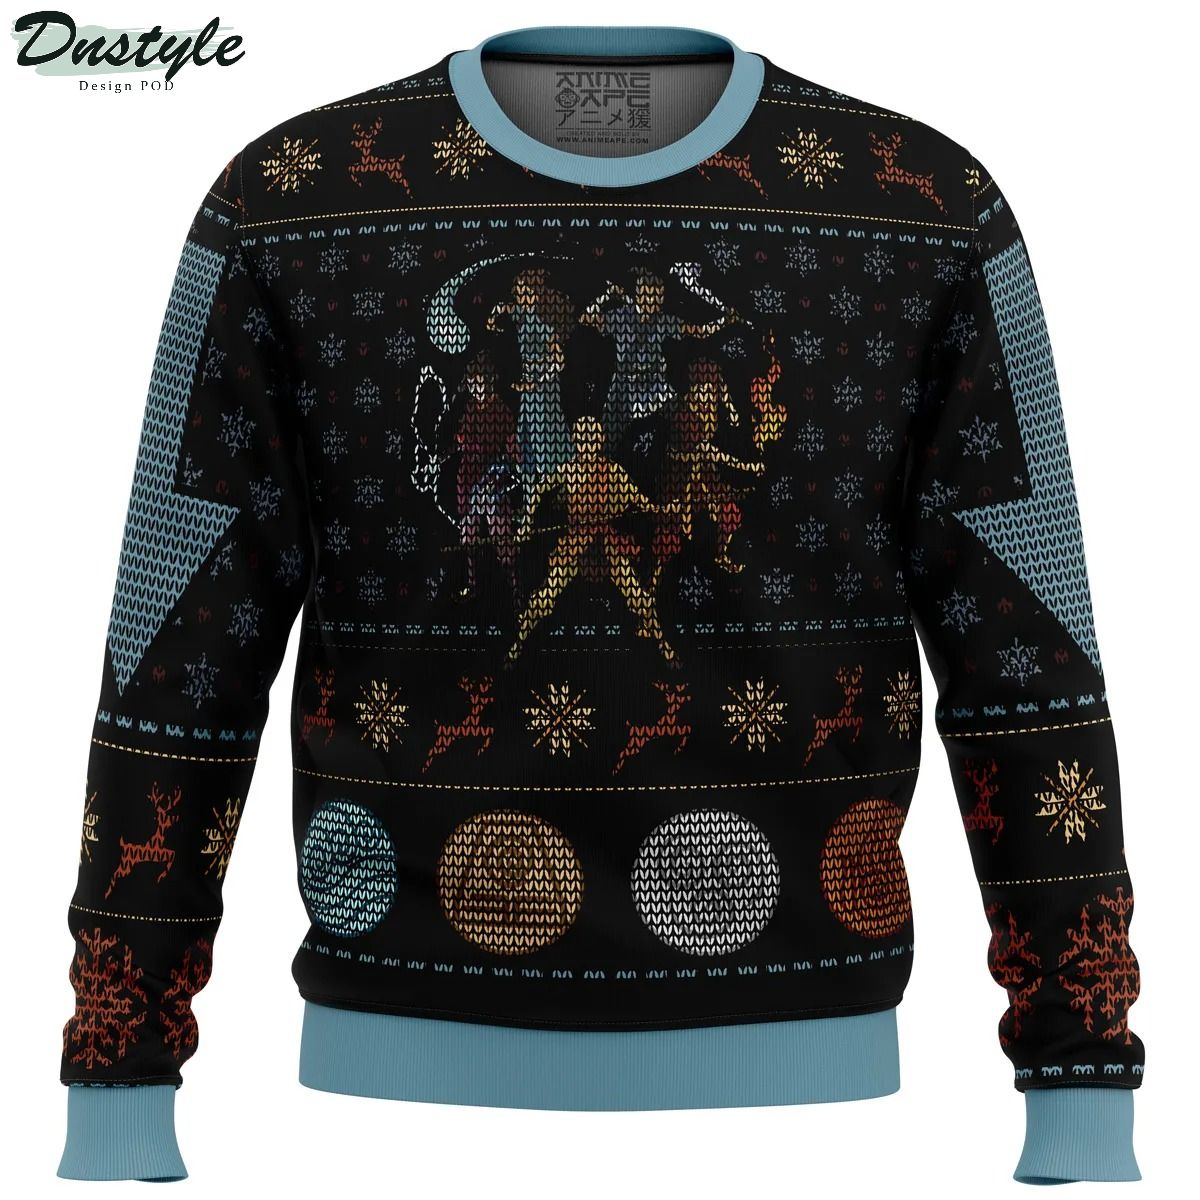 Avatar The Last Airbender Ugly Christmas Sweater